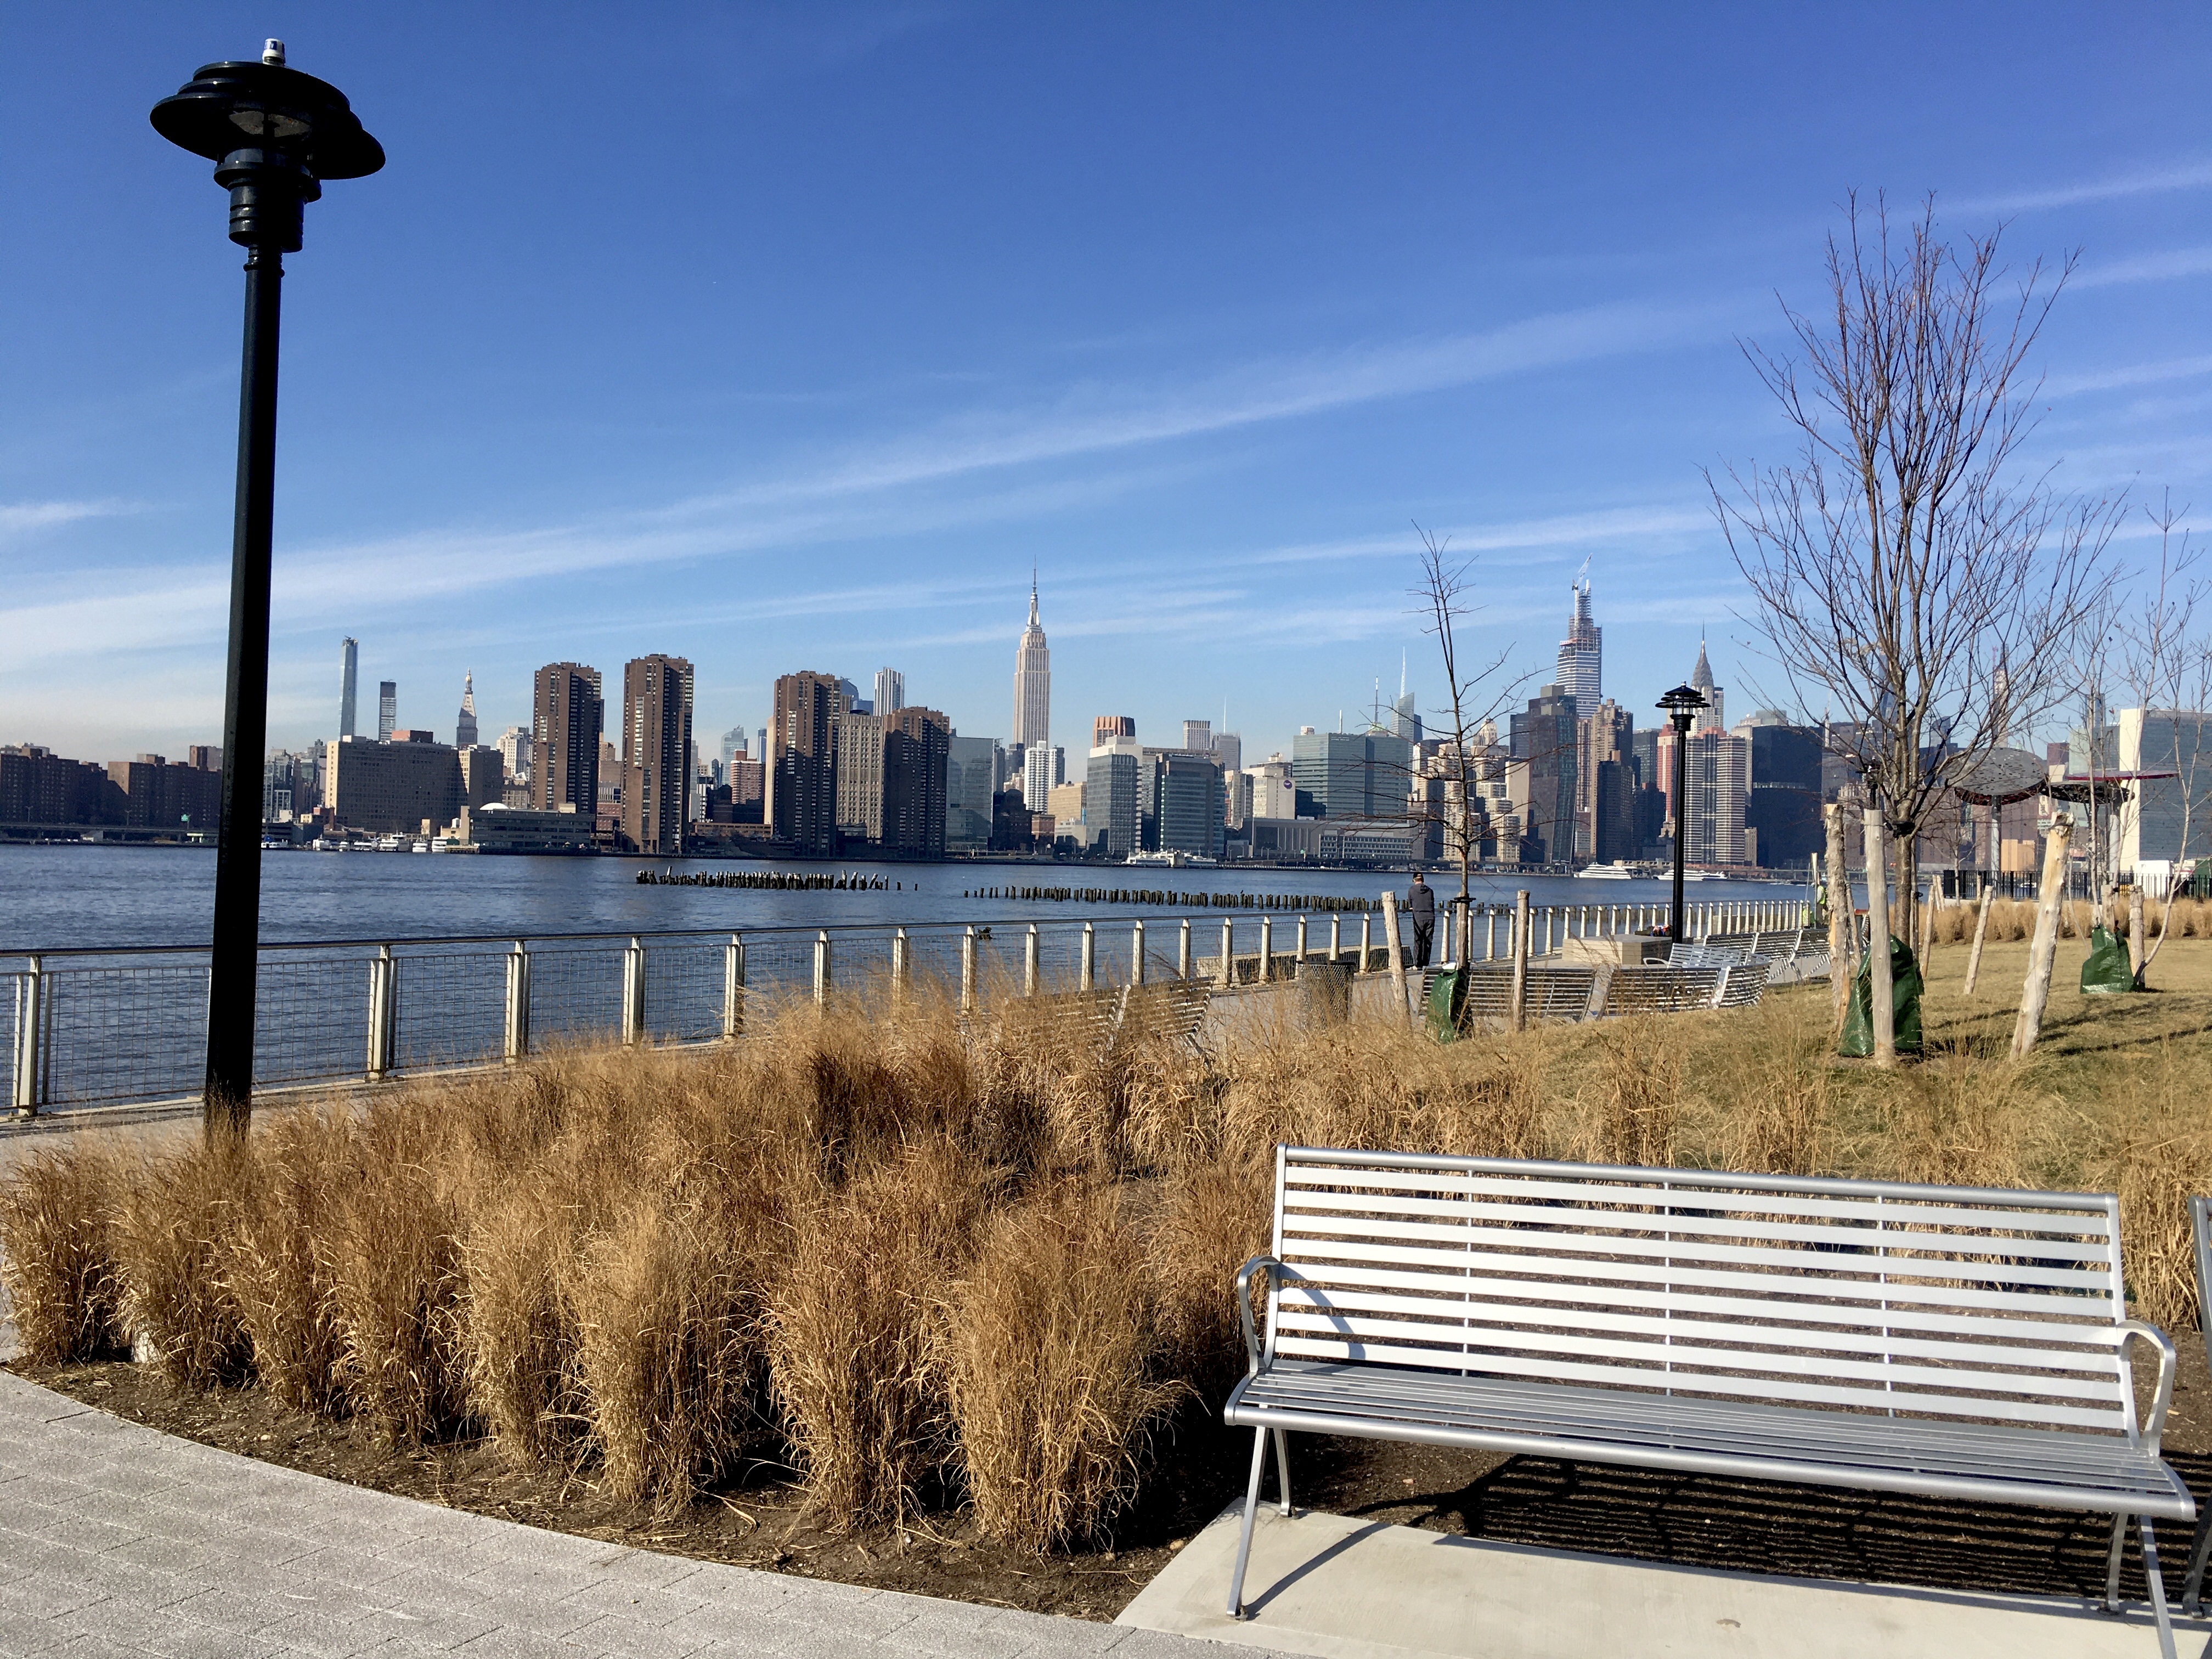 A public recreation area outside The Greenpoint has an excellent view of the Manhattan skyline. Photo: Lore Croghan/Brooklyn Eagle